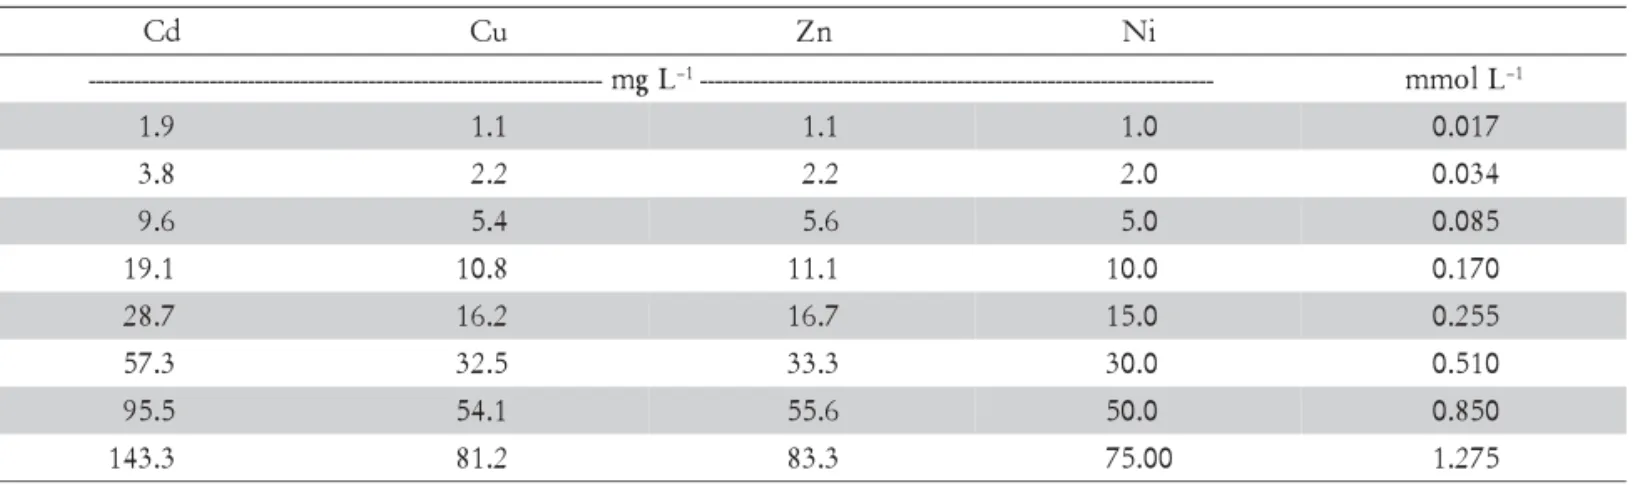 Table 1 – Amount of Cd, Cu, Zn and Ni used for the obtaining the adsorption isotherms and its molar equivalency.